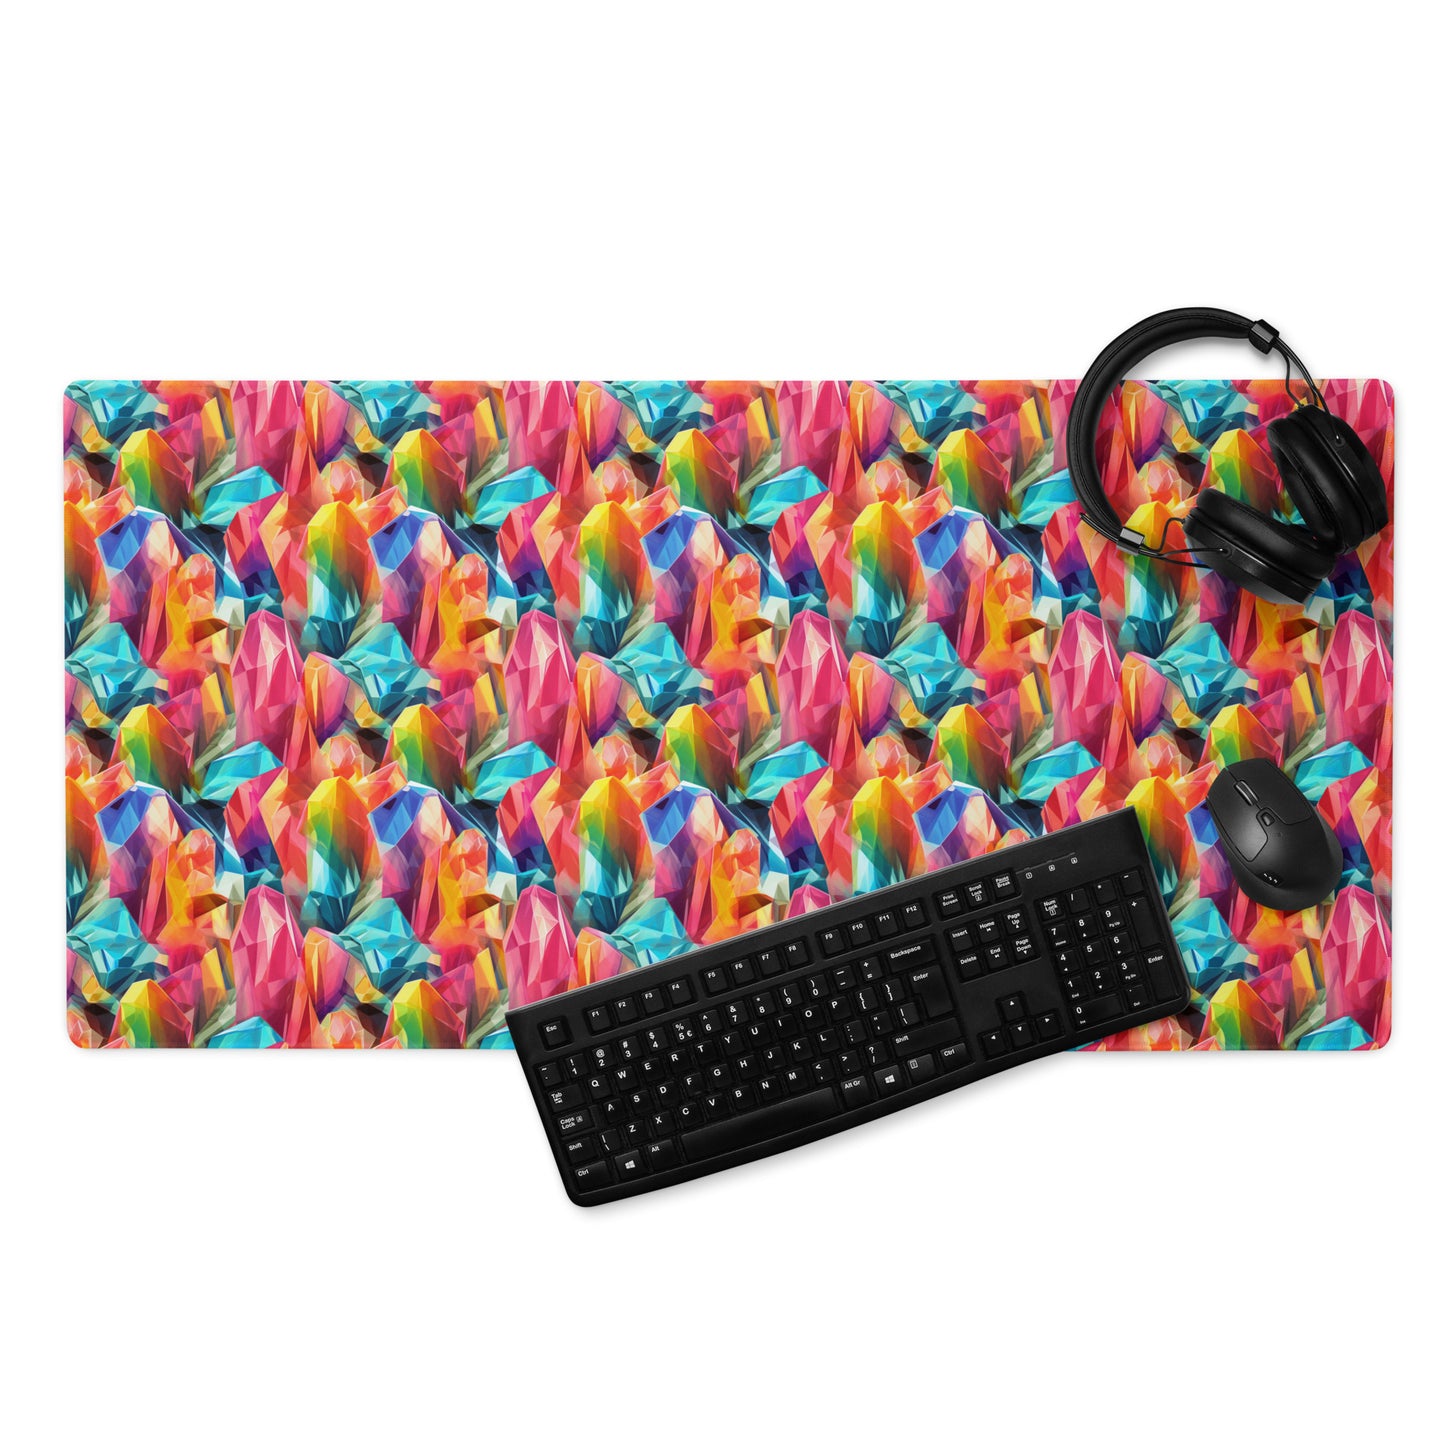 A 36" x 18" gaming desk pad with rainbow crystals. A keyboard, mouse, and headphones sit on it.